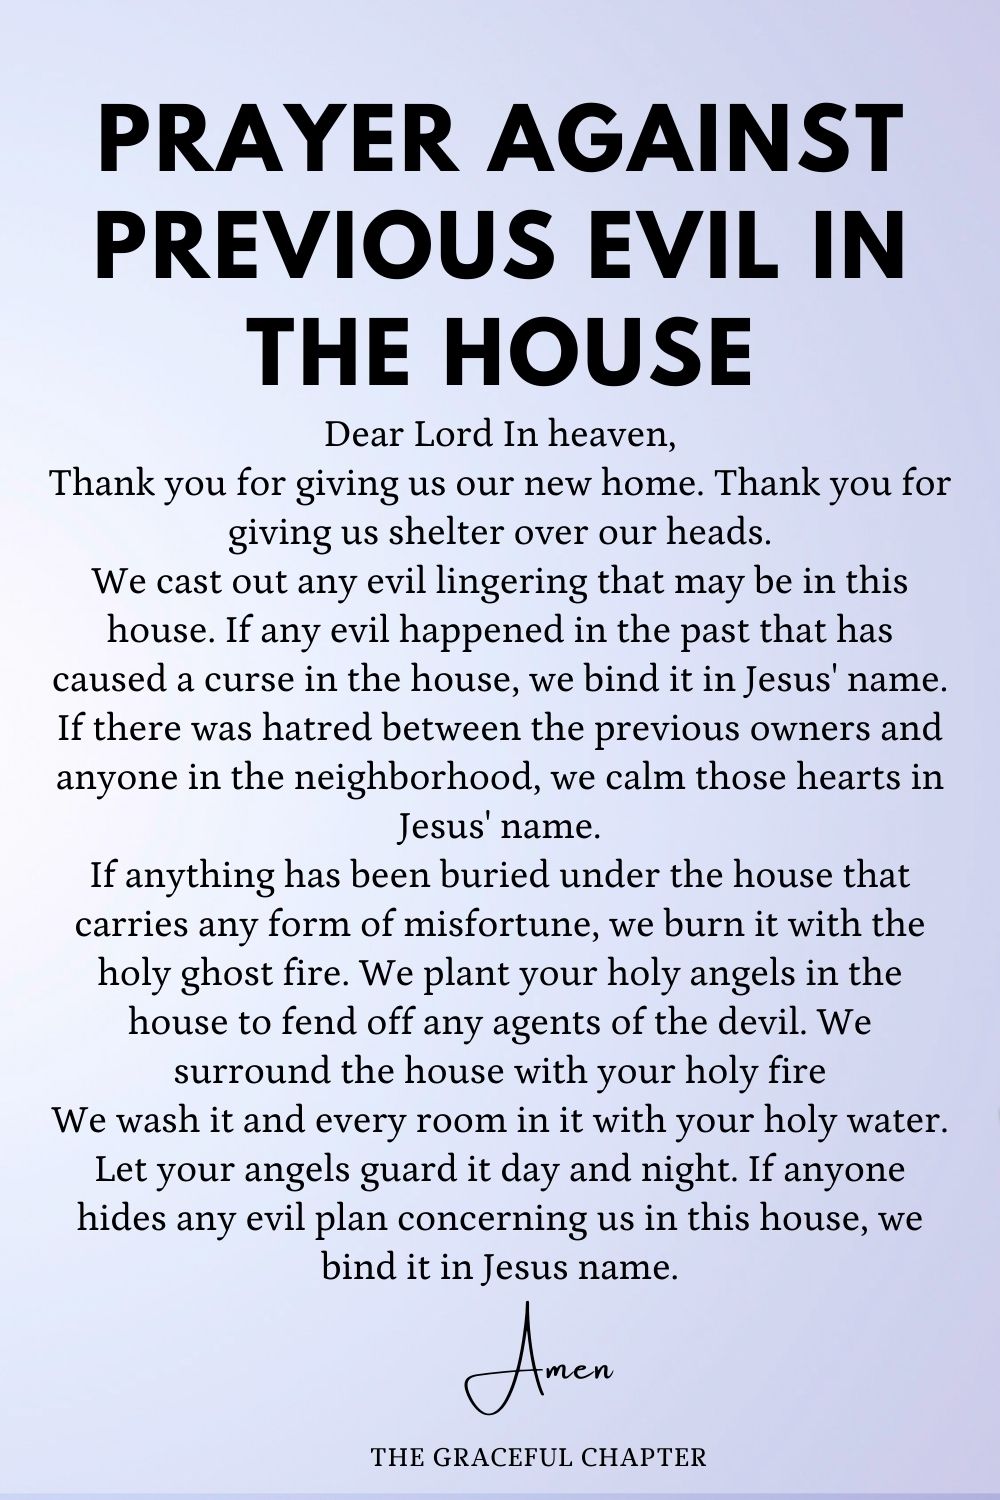 Prayer against previous evil in the house